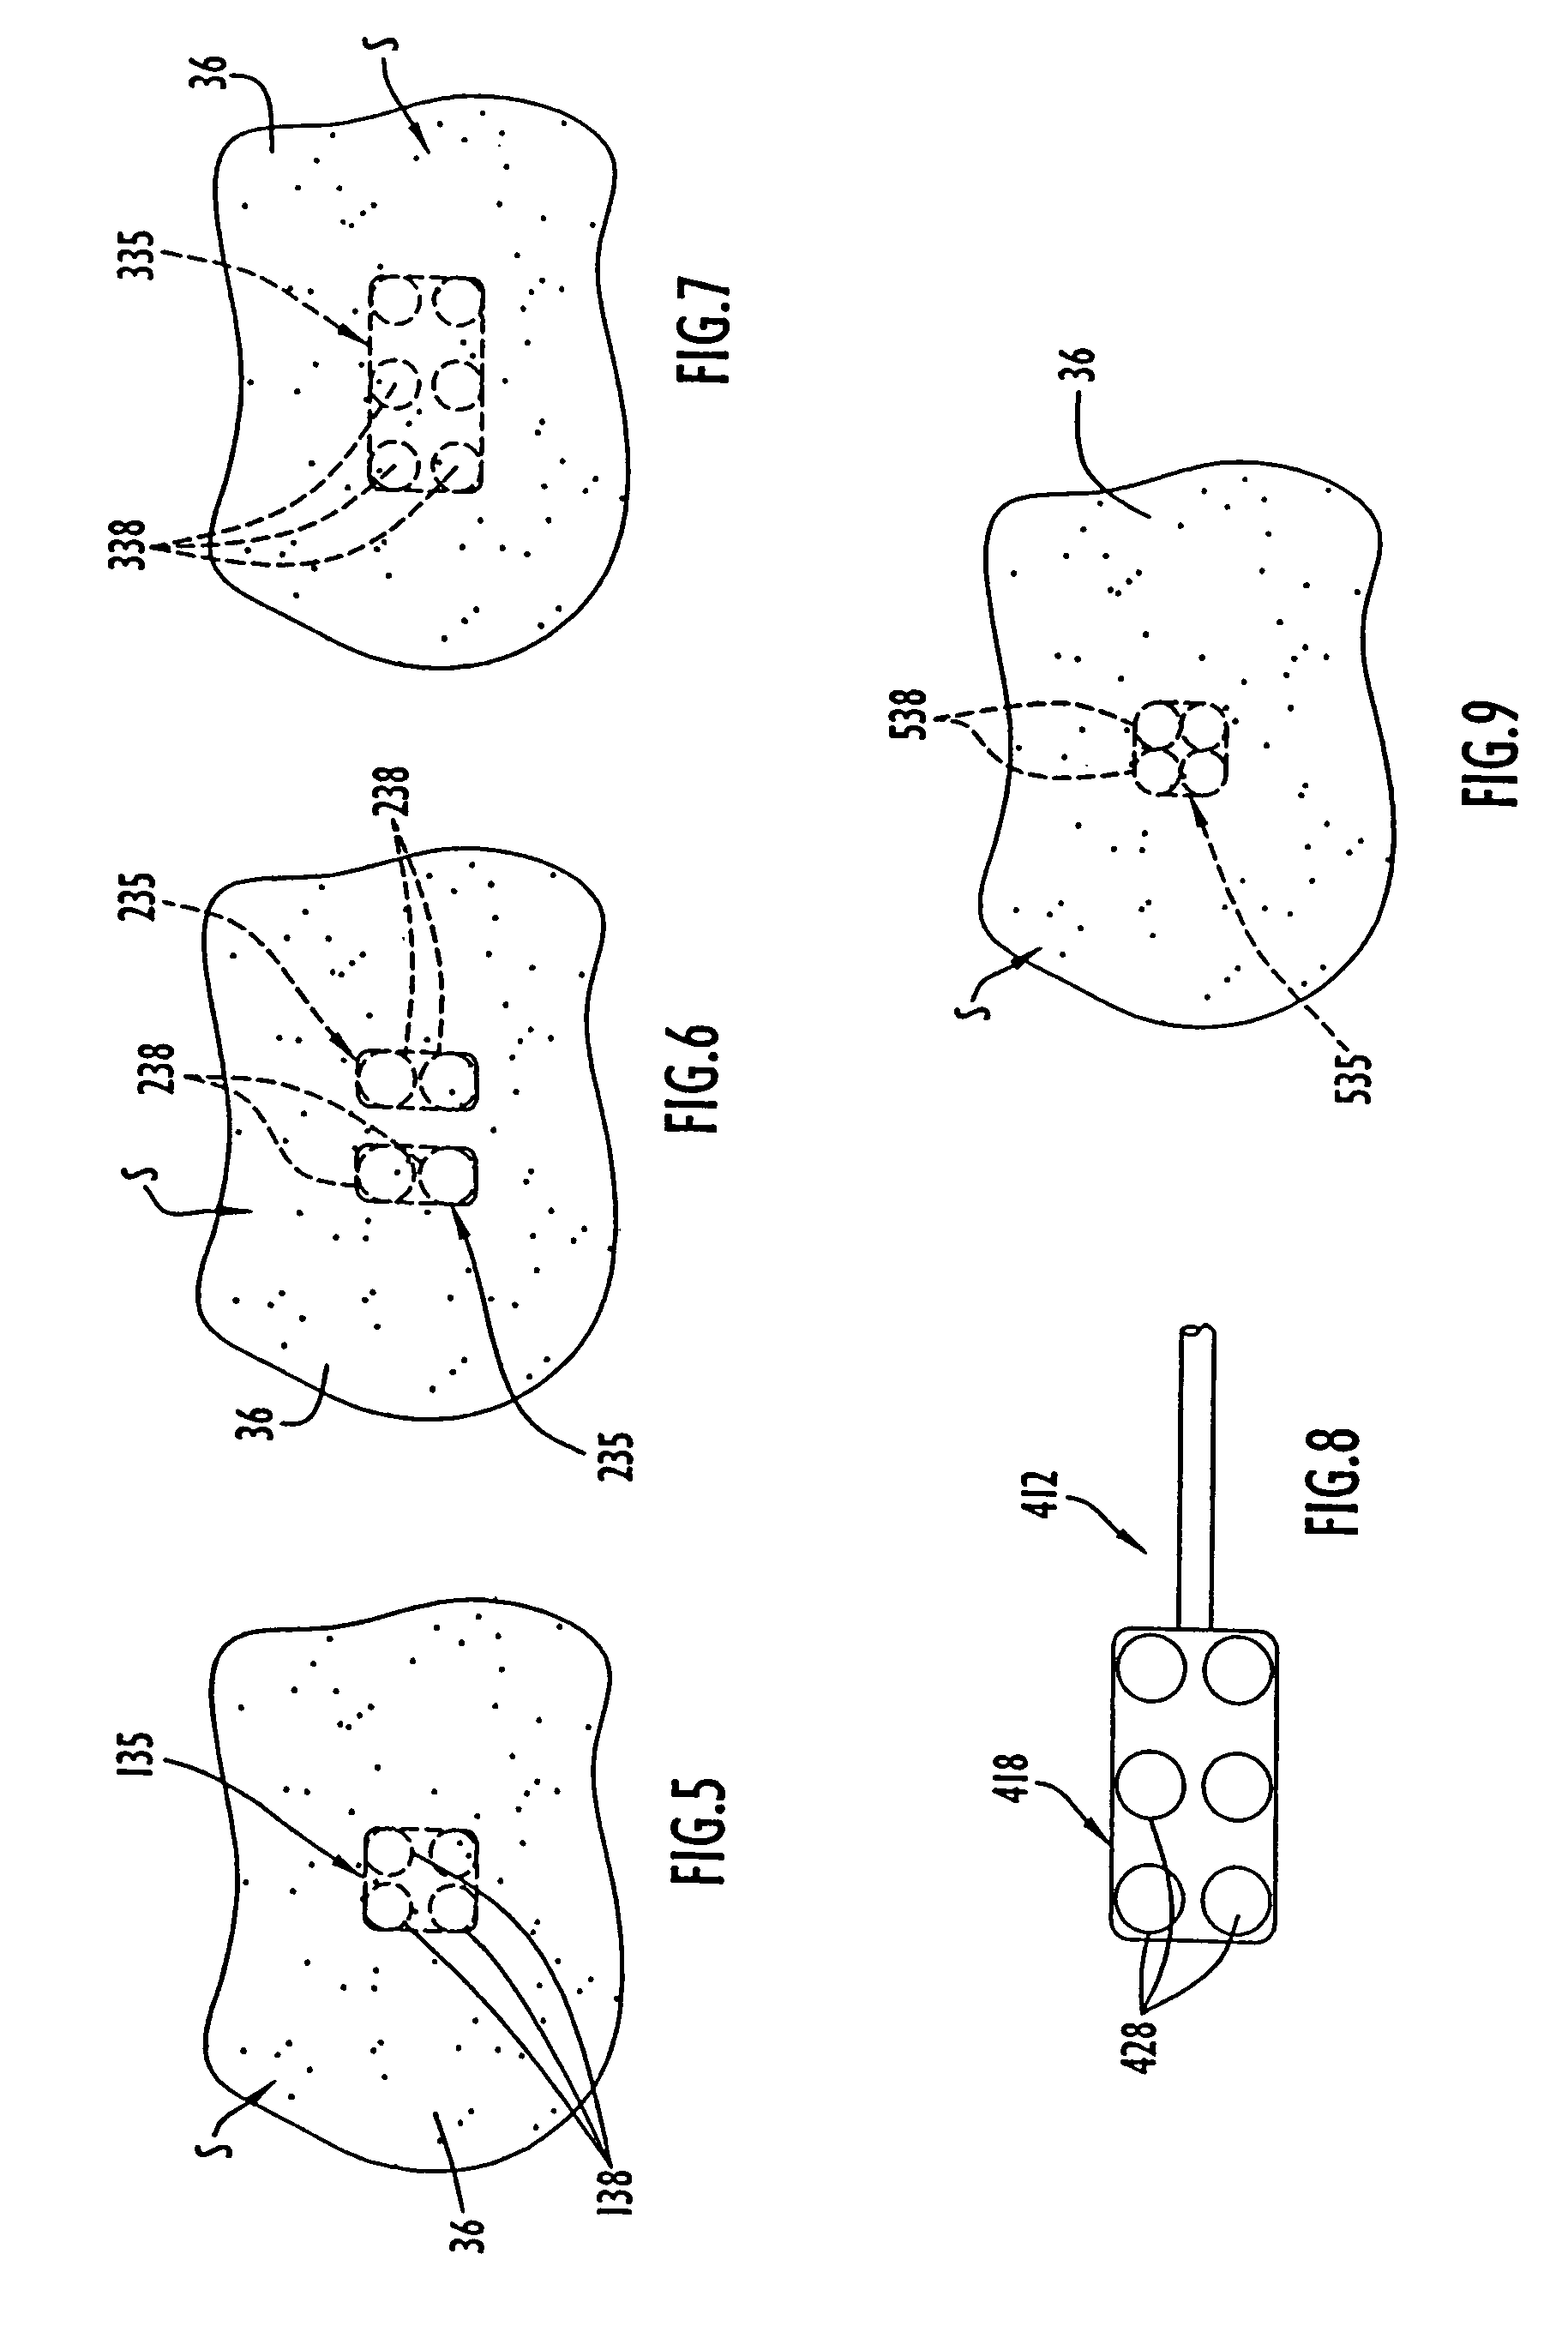 Method for guiding a medical device